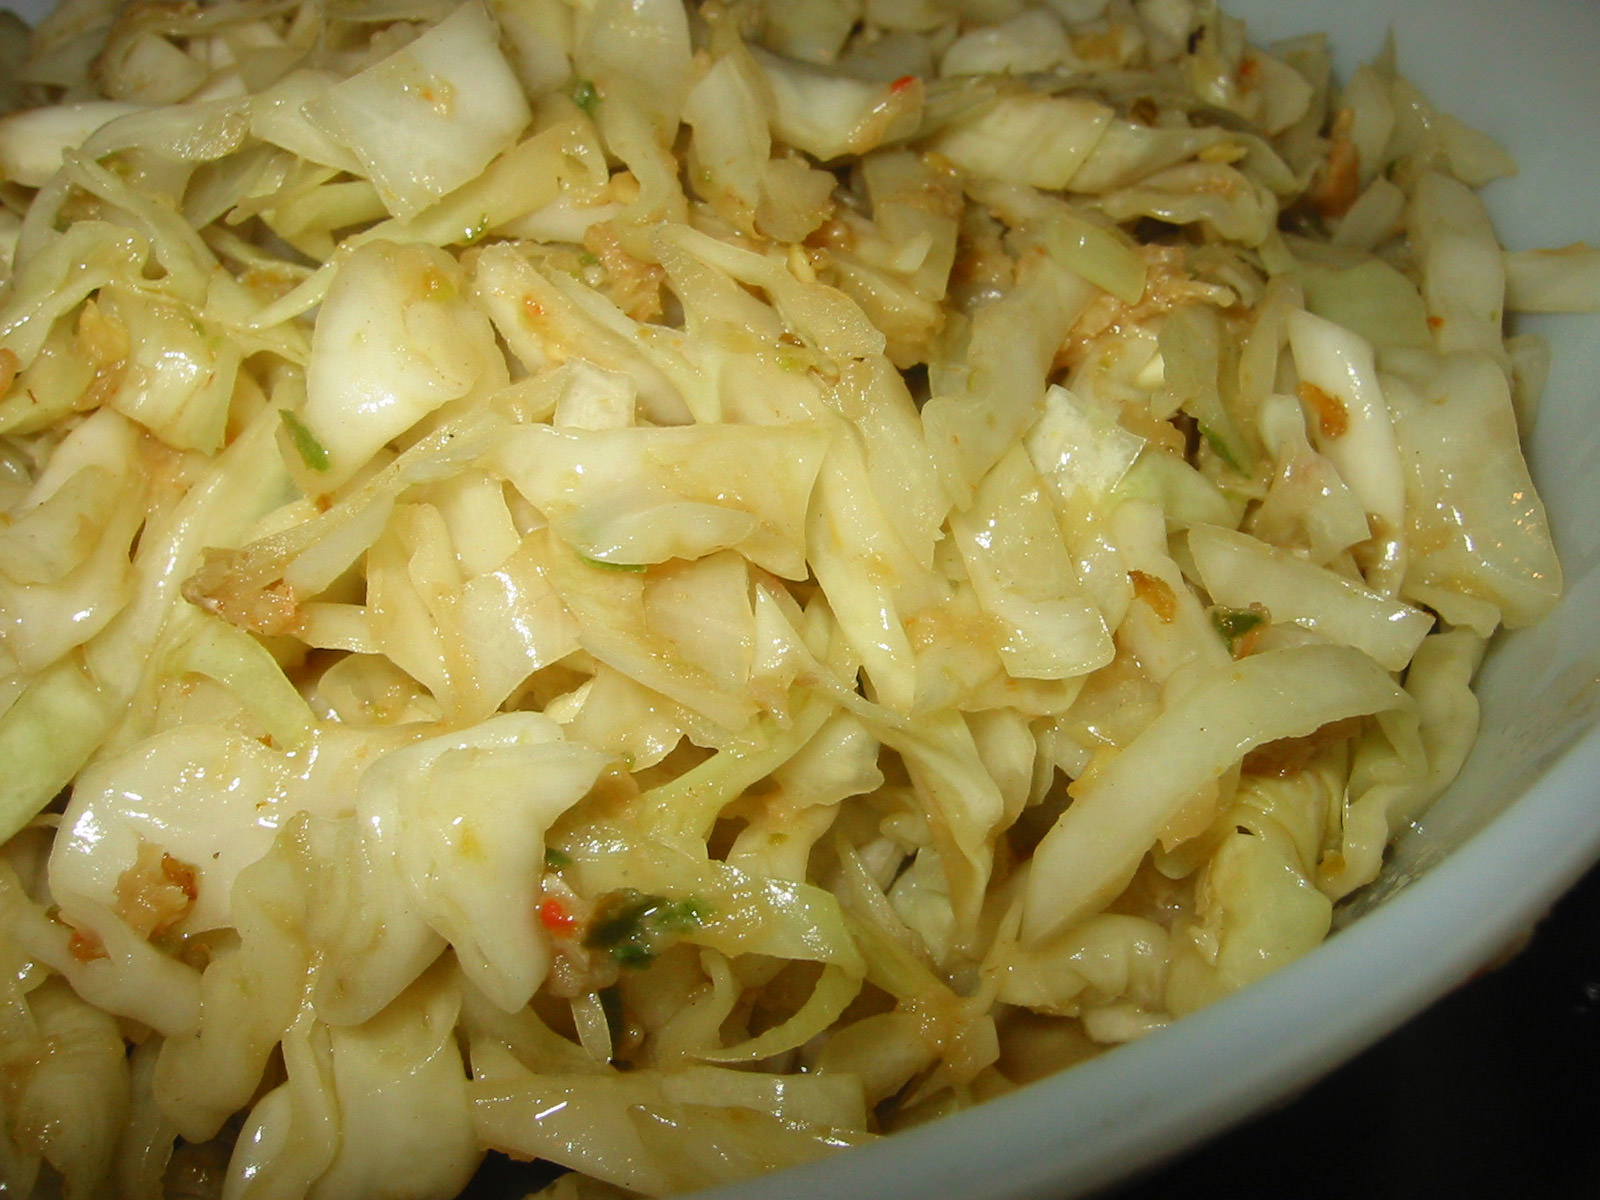 Cabbage with sambal belacan